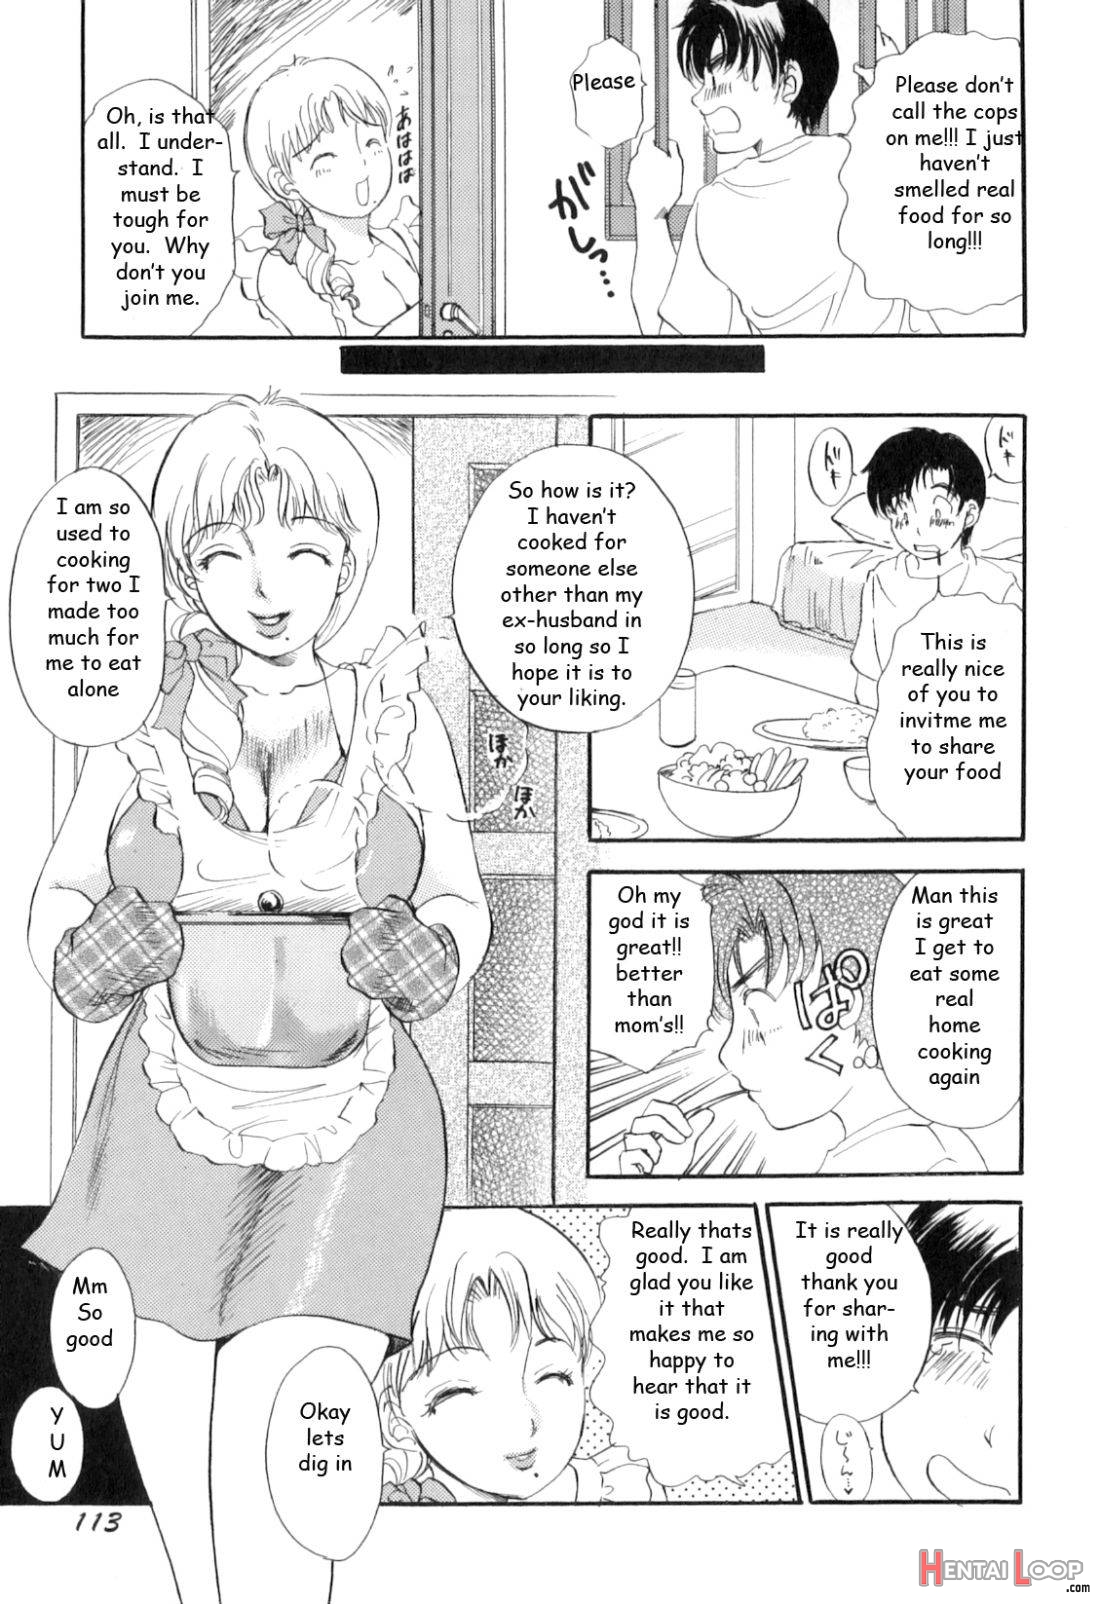 Guess What Is For Dinner? page 3